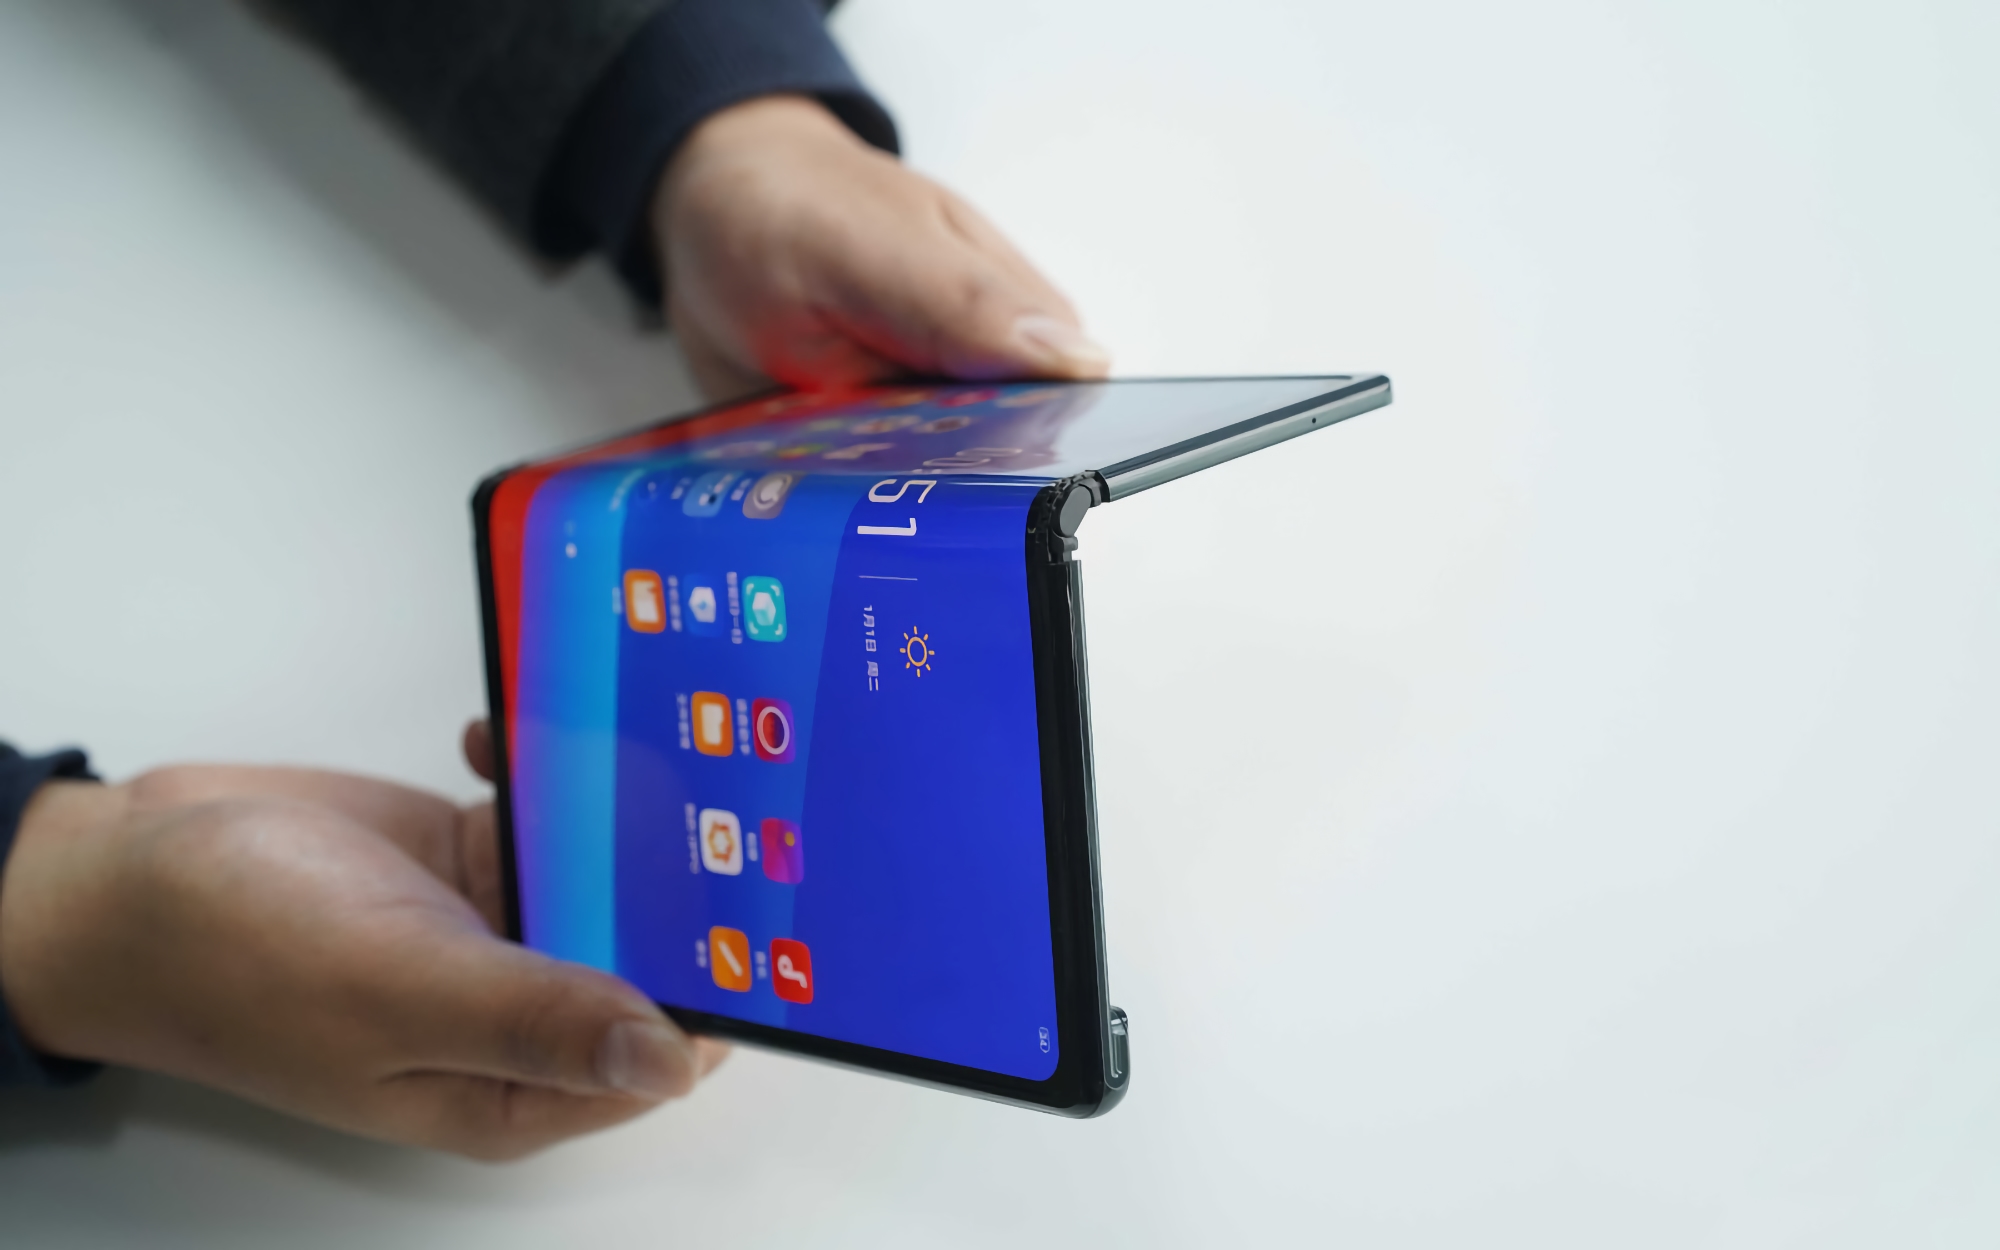 Insider: OPPO foldable smartphone will get 4,500mAh battery with 65W fast charging